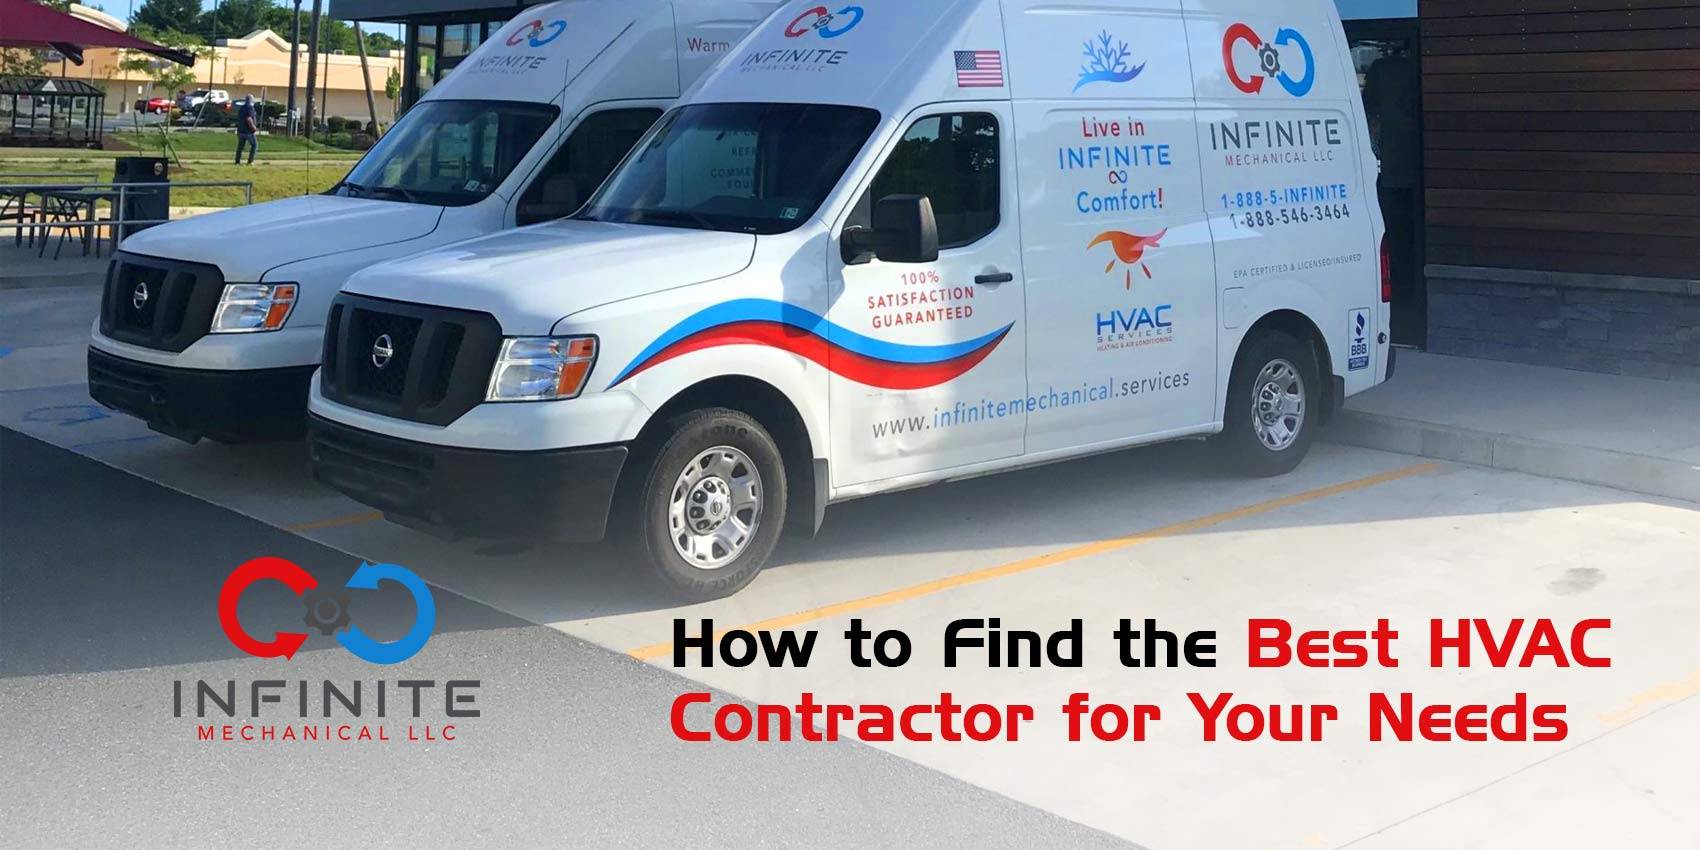 How to Find the Best HVAC Contractor for Your Needs, infinite blog post title